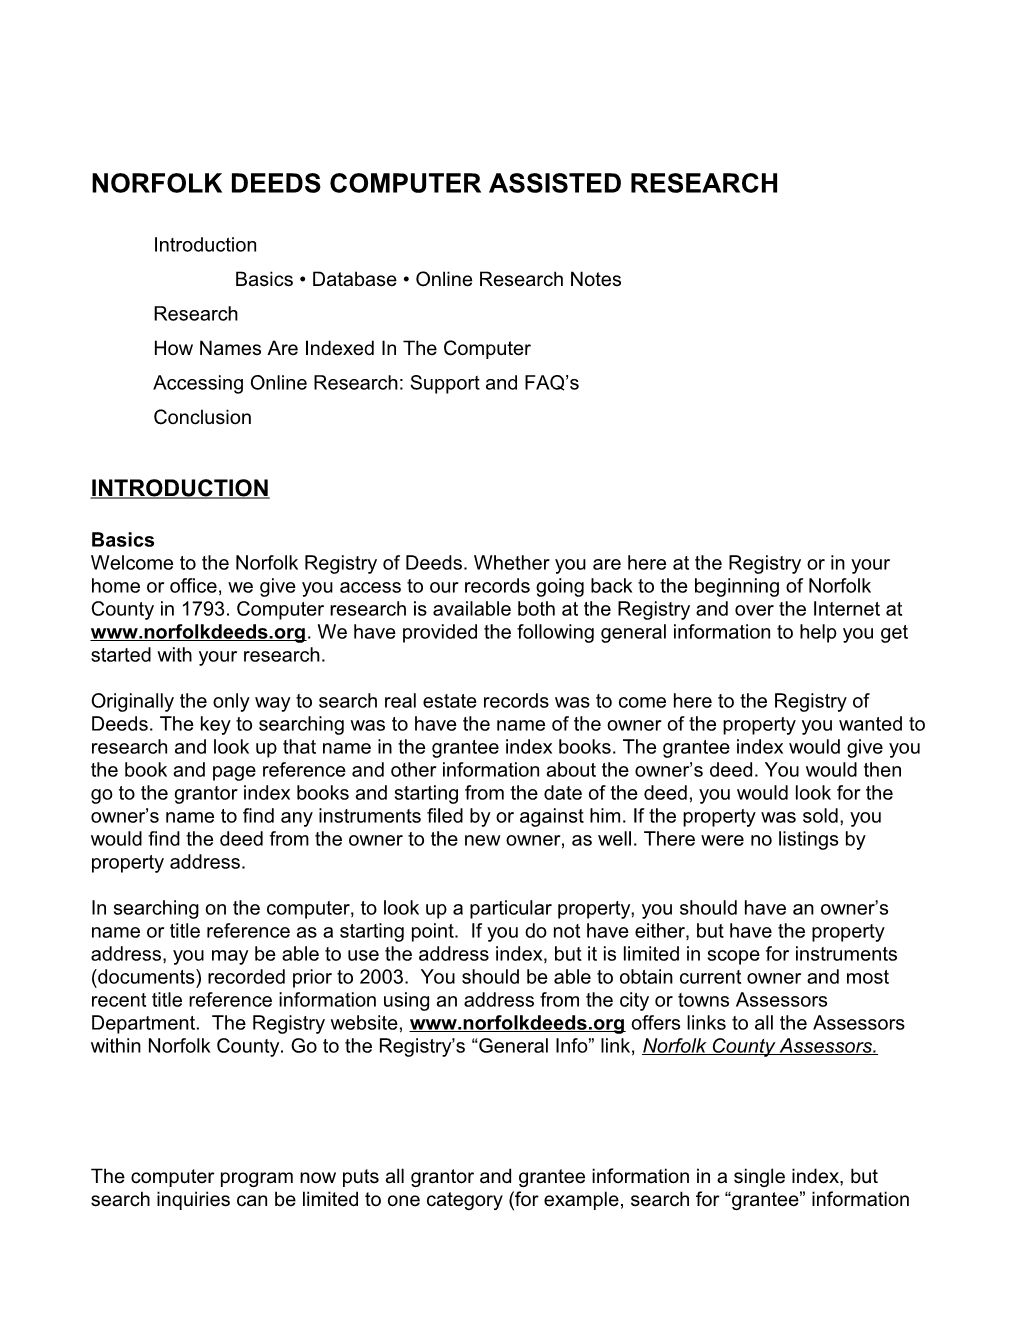 How to Best Use the Norfolk Registry of Deeds